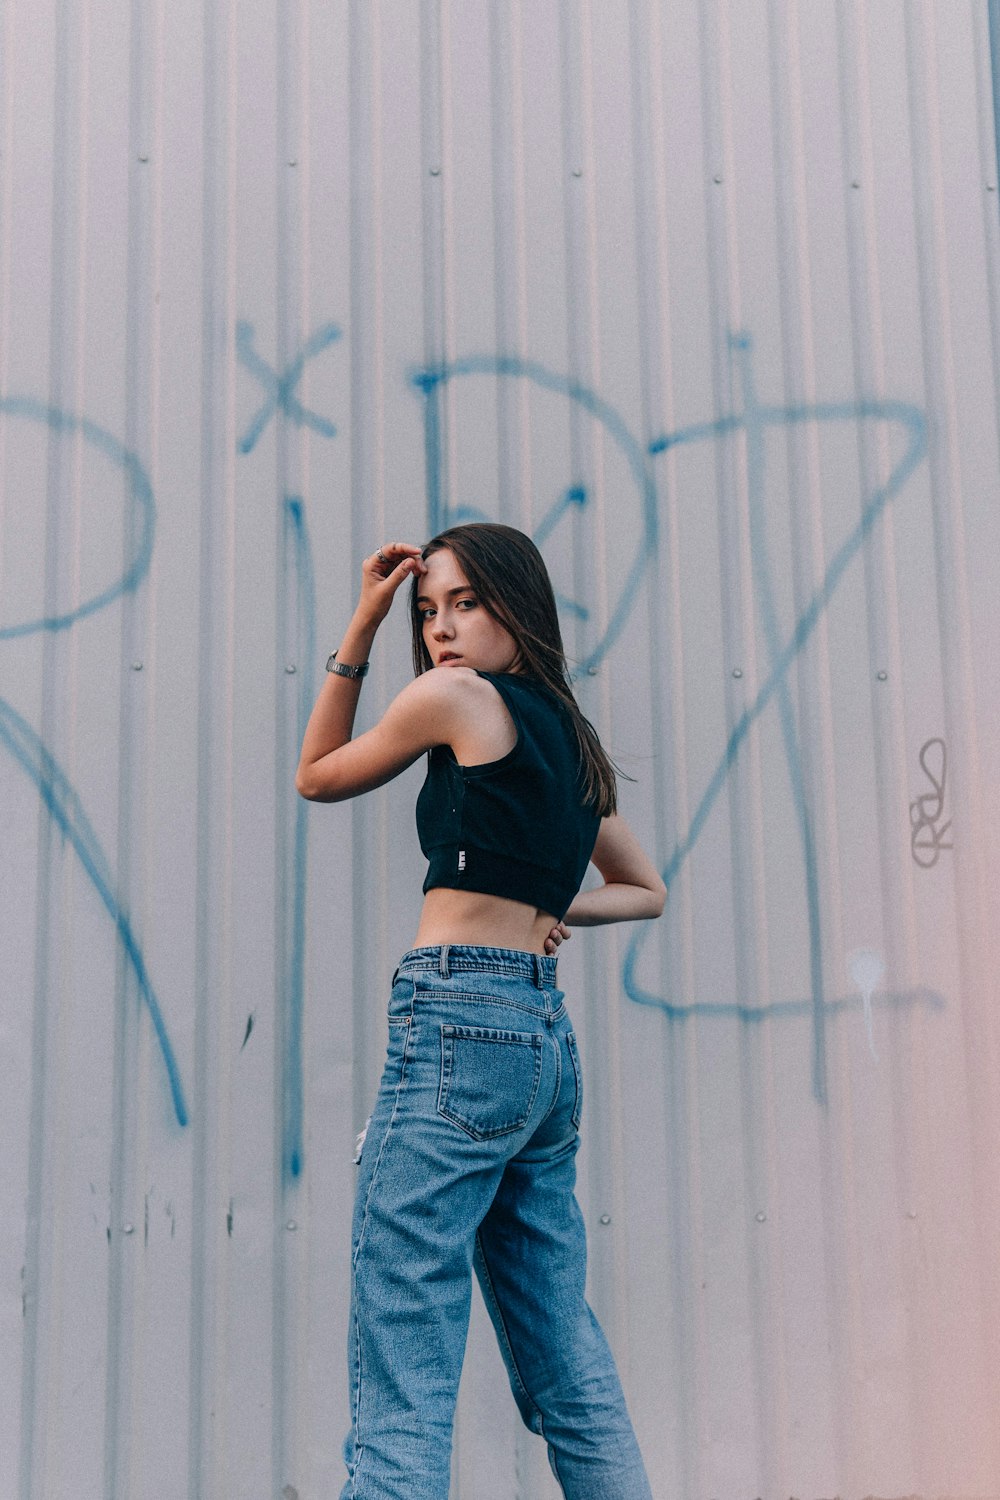 Woman in black crop top and blue denim jeans standing beside white wall  during daytime photo – Free Apparel Image on Unsplash